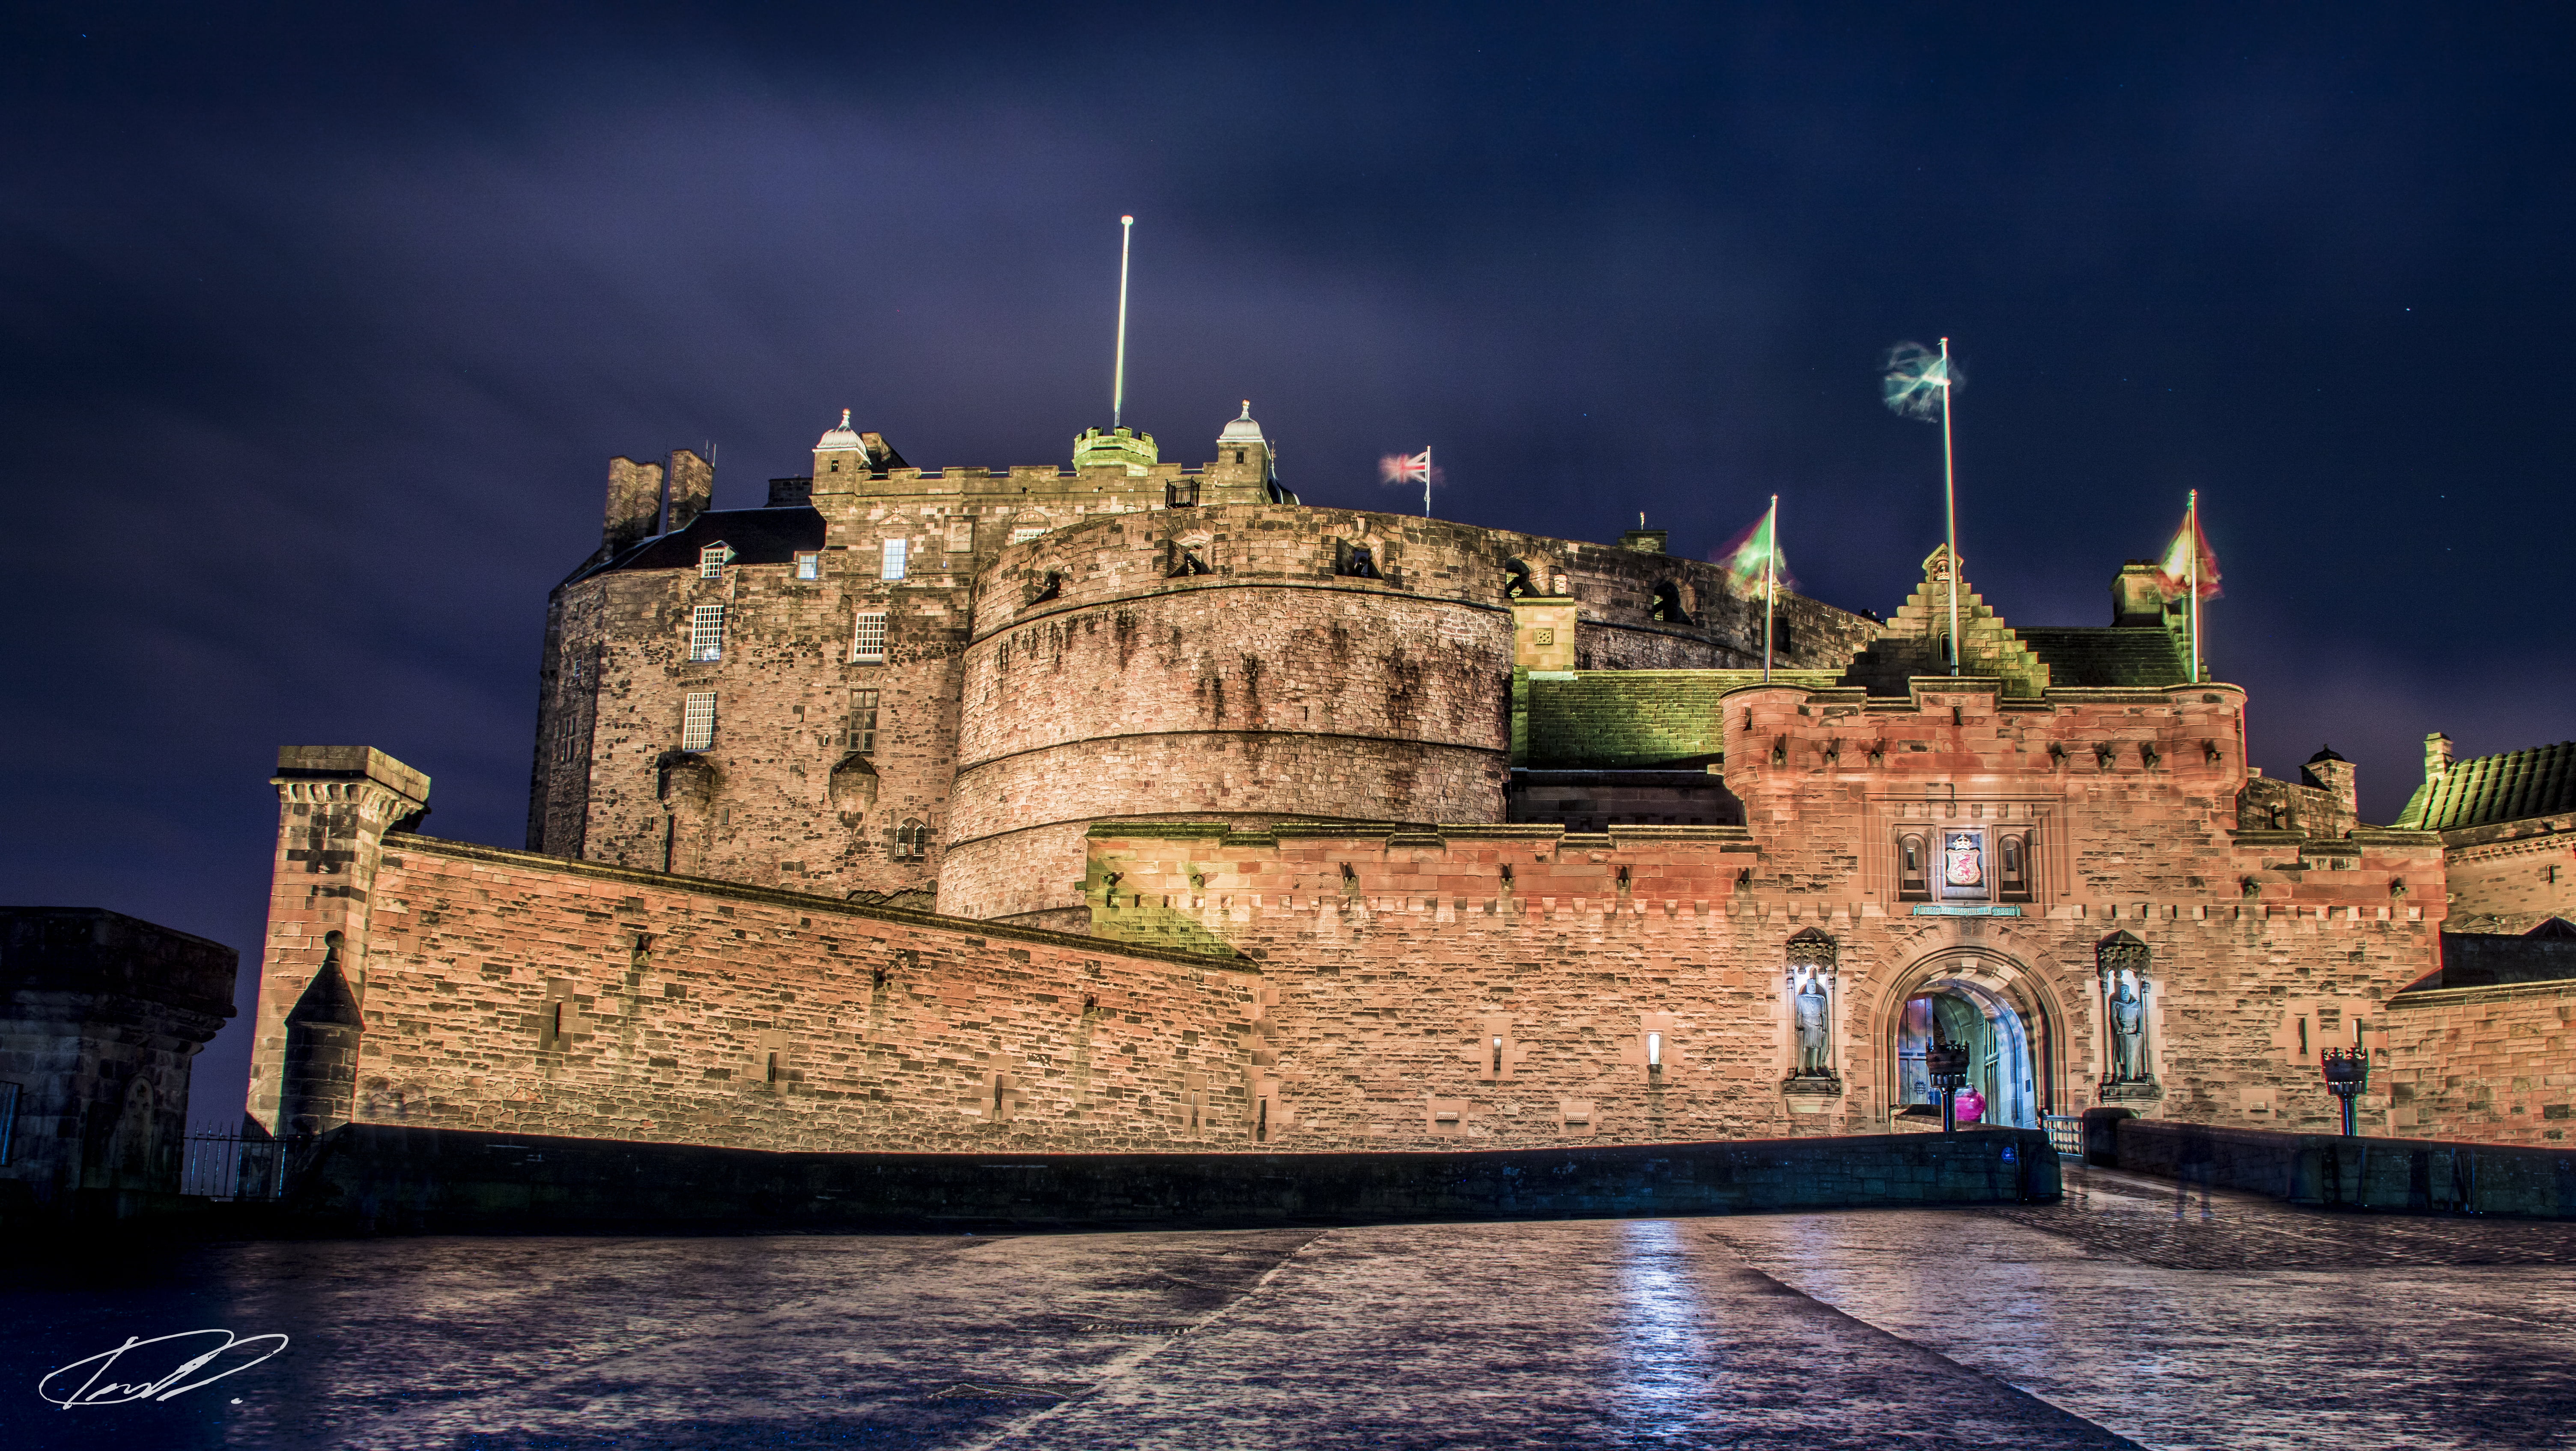 brown castle with flags under cloudy sky at night time, edinburgh castle